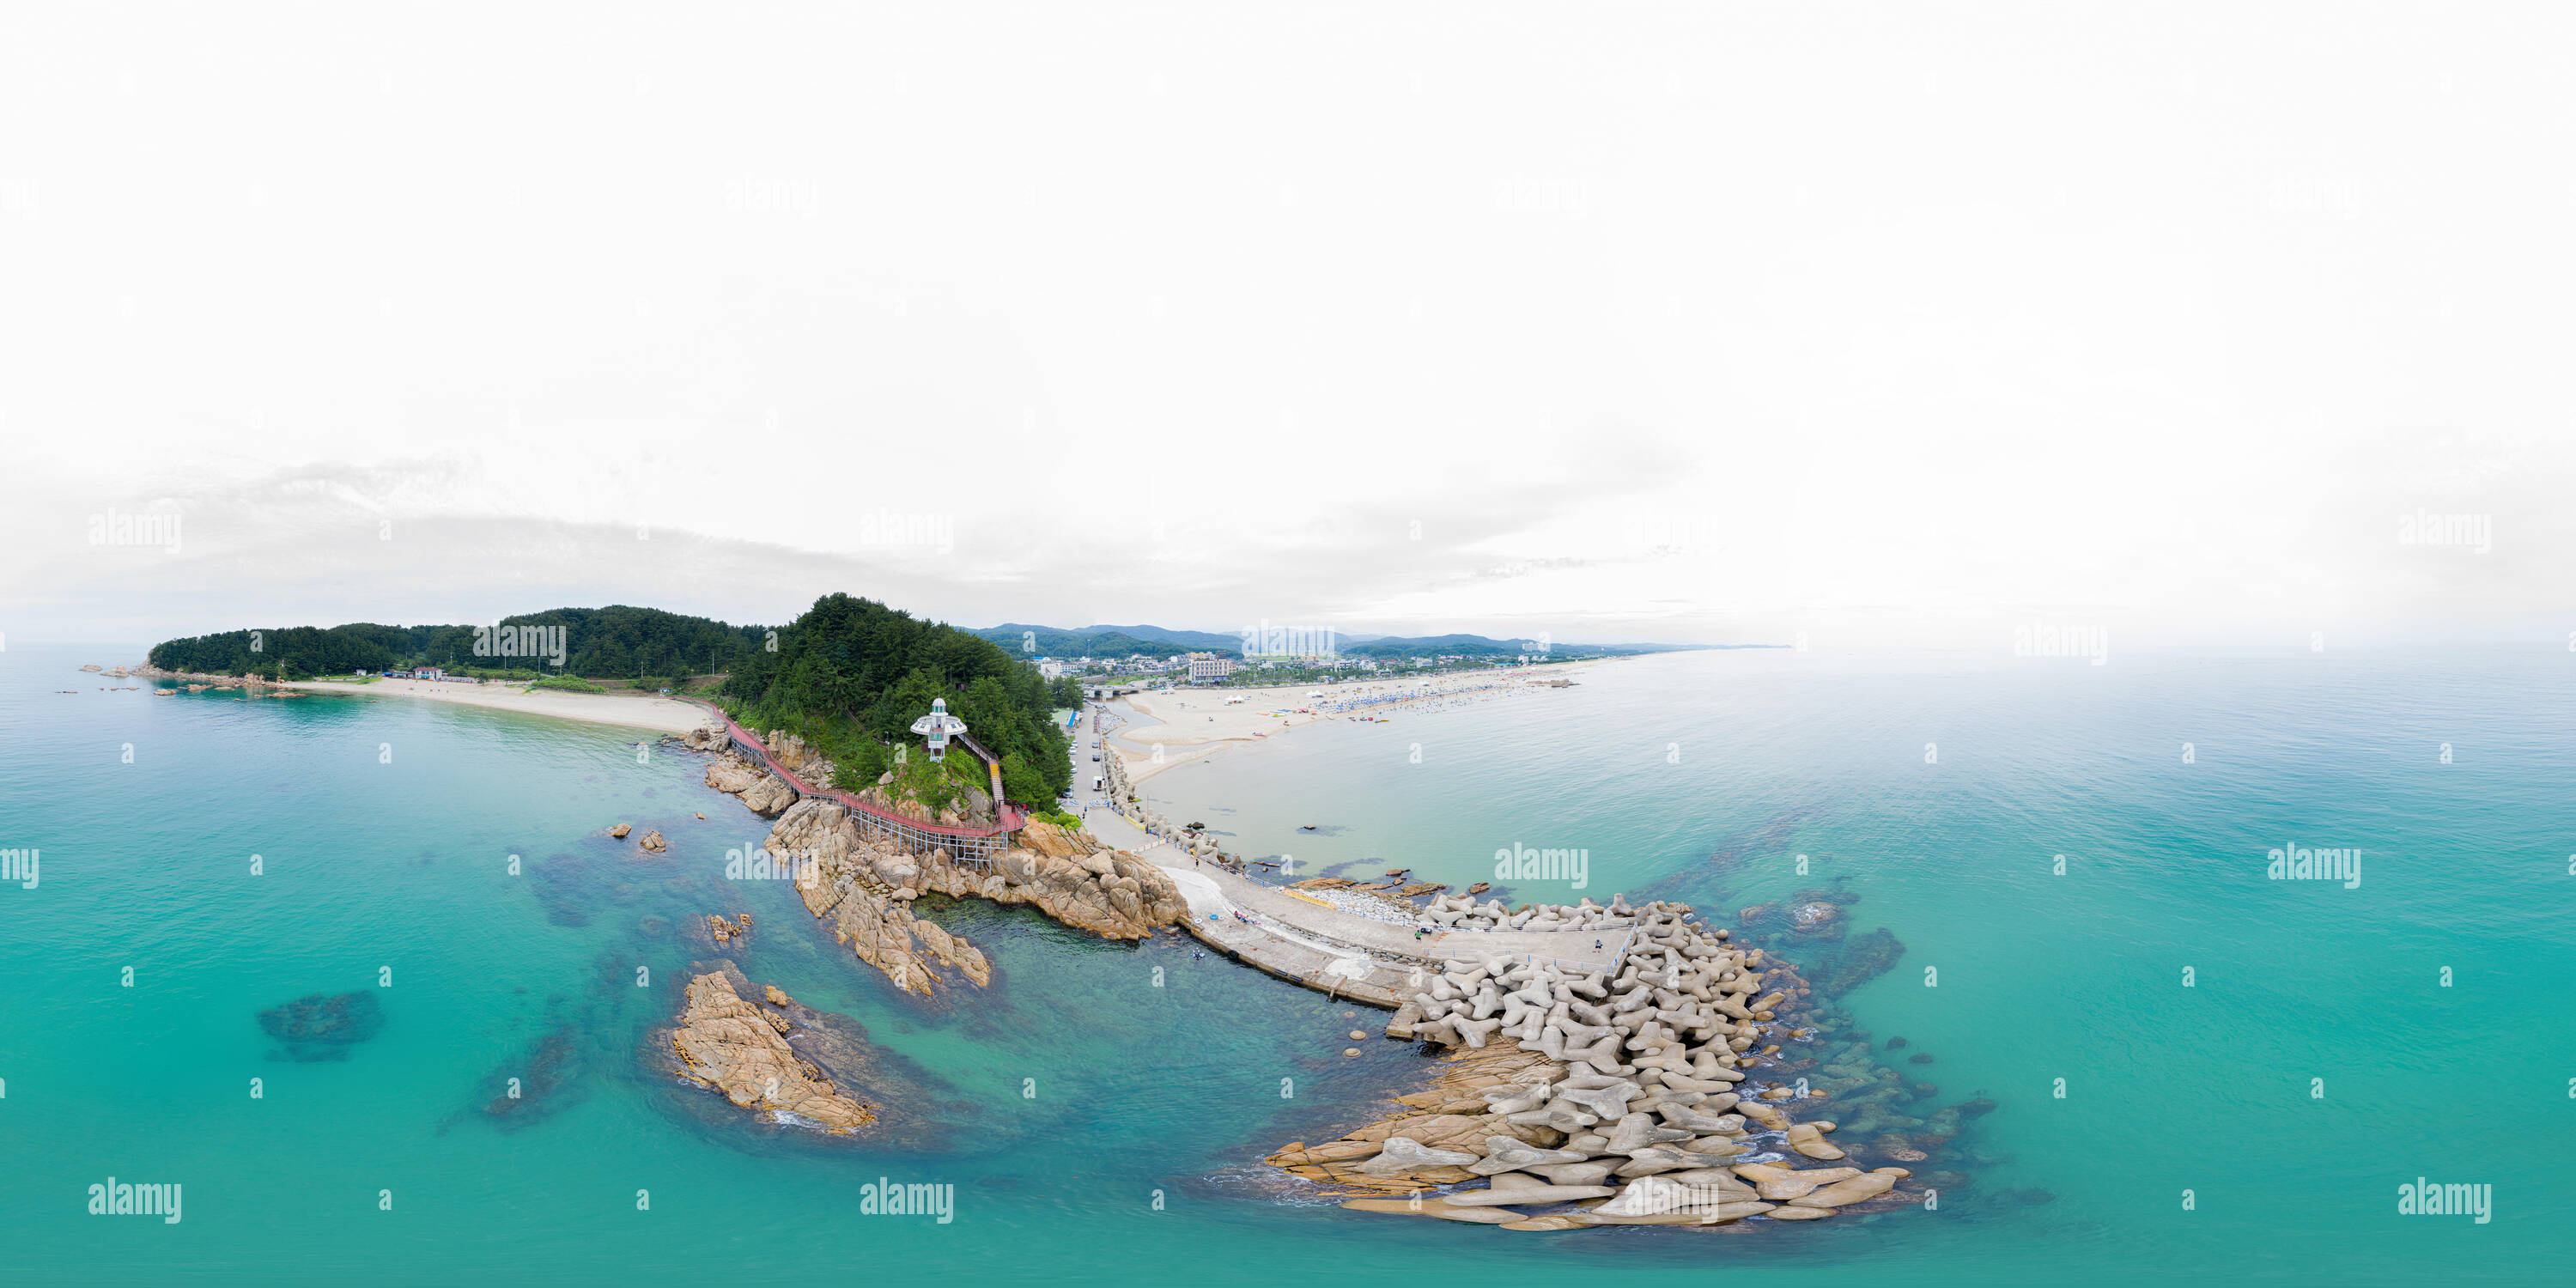 360 degree panoramic view of Donghae, South Korea 6 August 2019: 360 degrees spherical panorama with beautiful beach. Drone shot of beach and island. VR content.